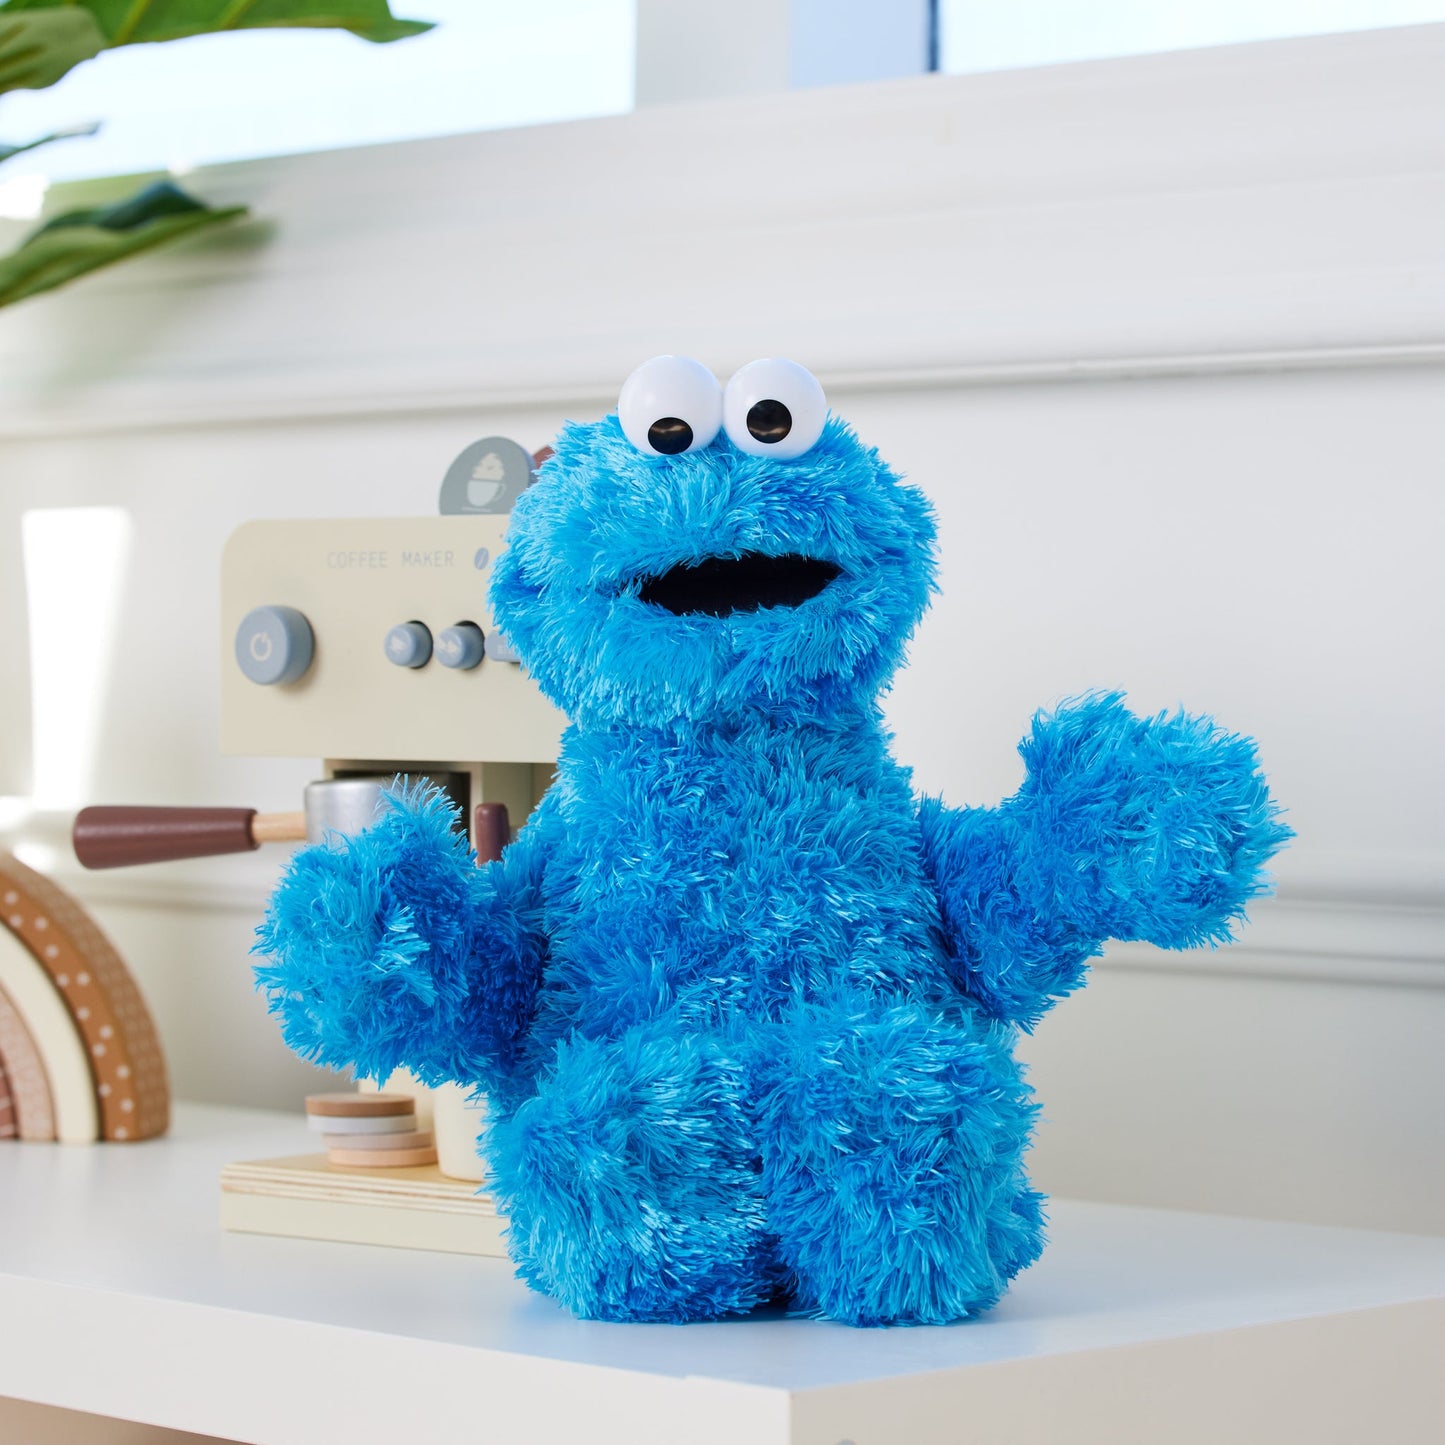 COOKIE MONSTER, 12 IN